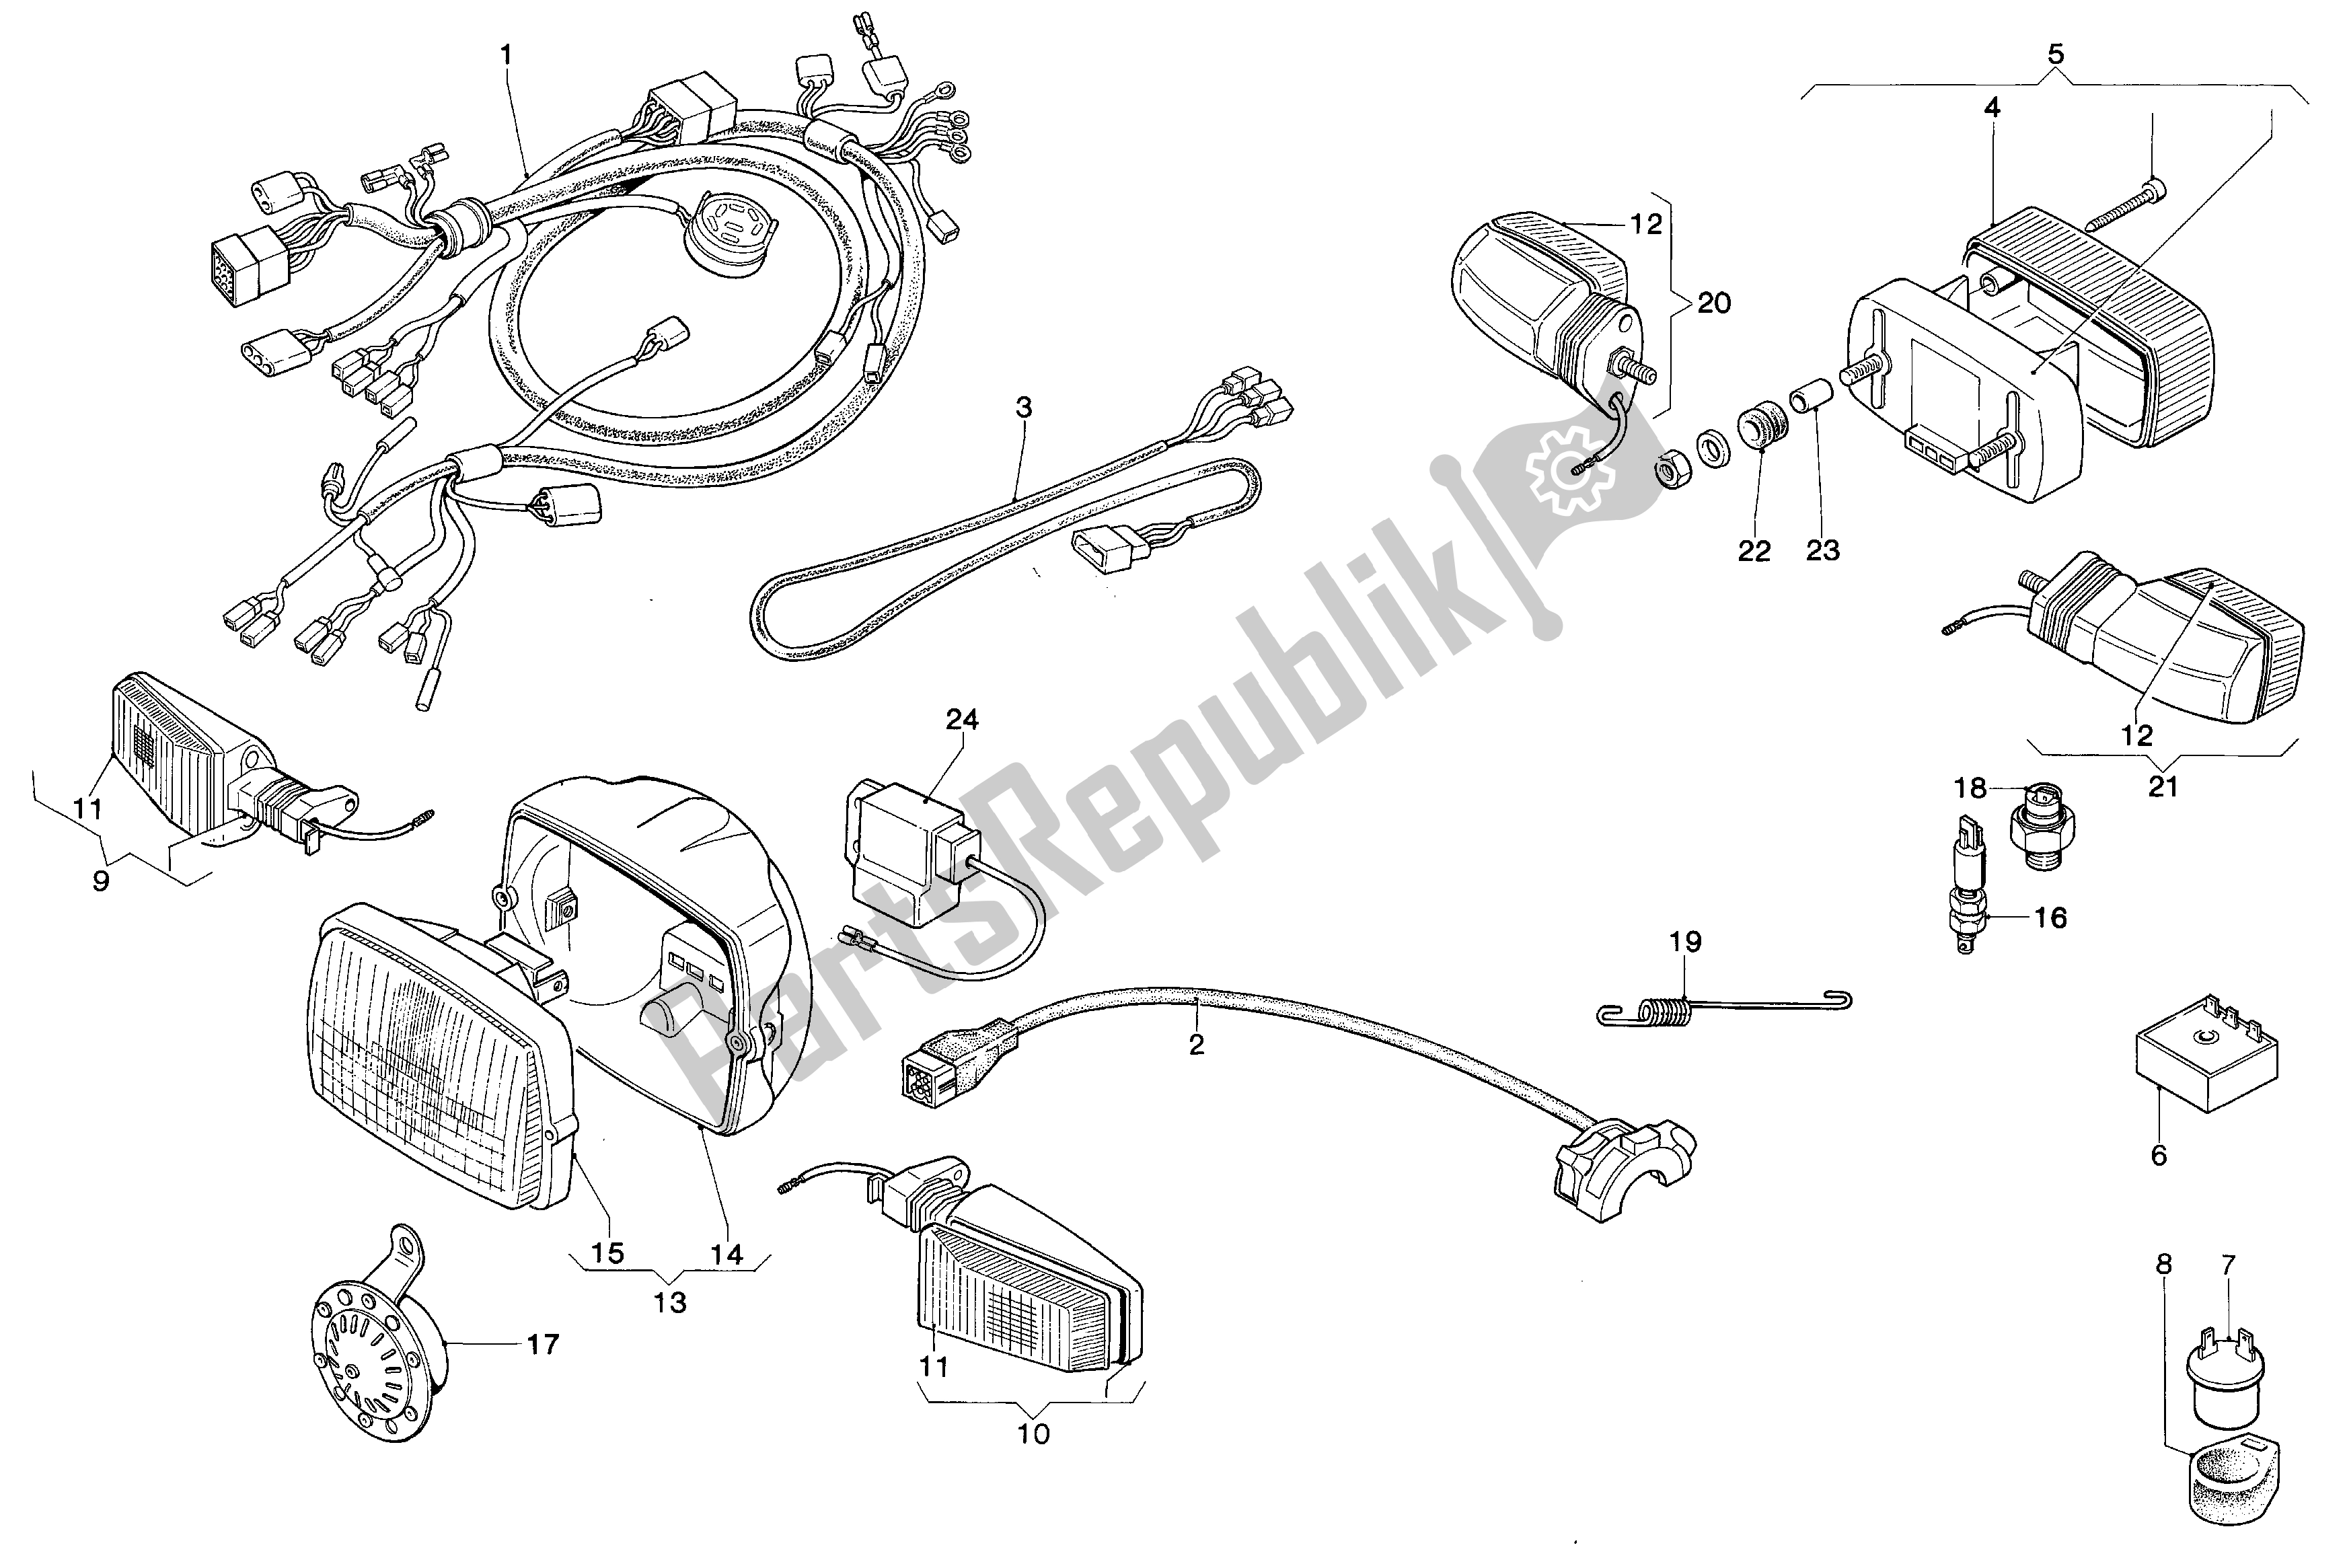 All parts for the Electrical System - Kick Starter of the Aprilia ET 50 1987